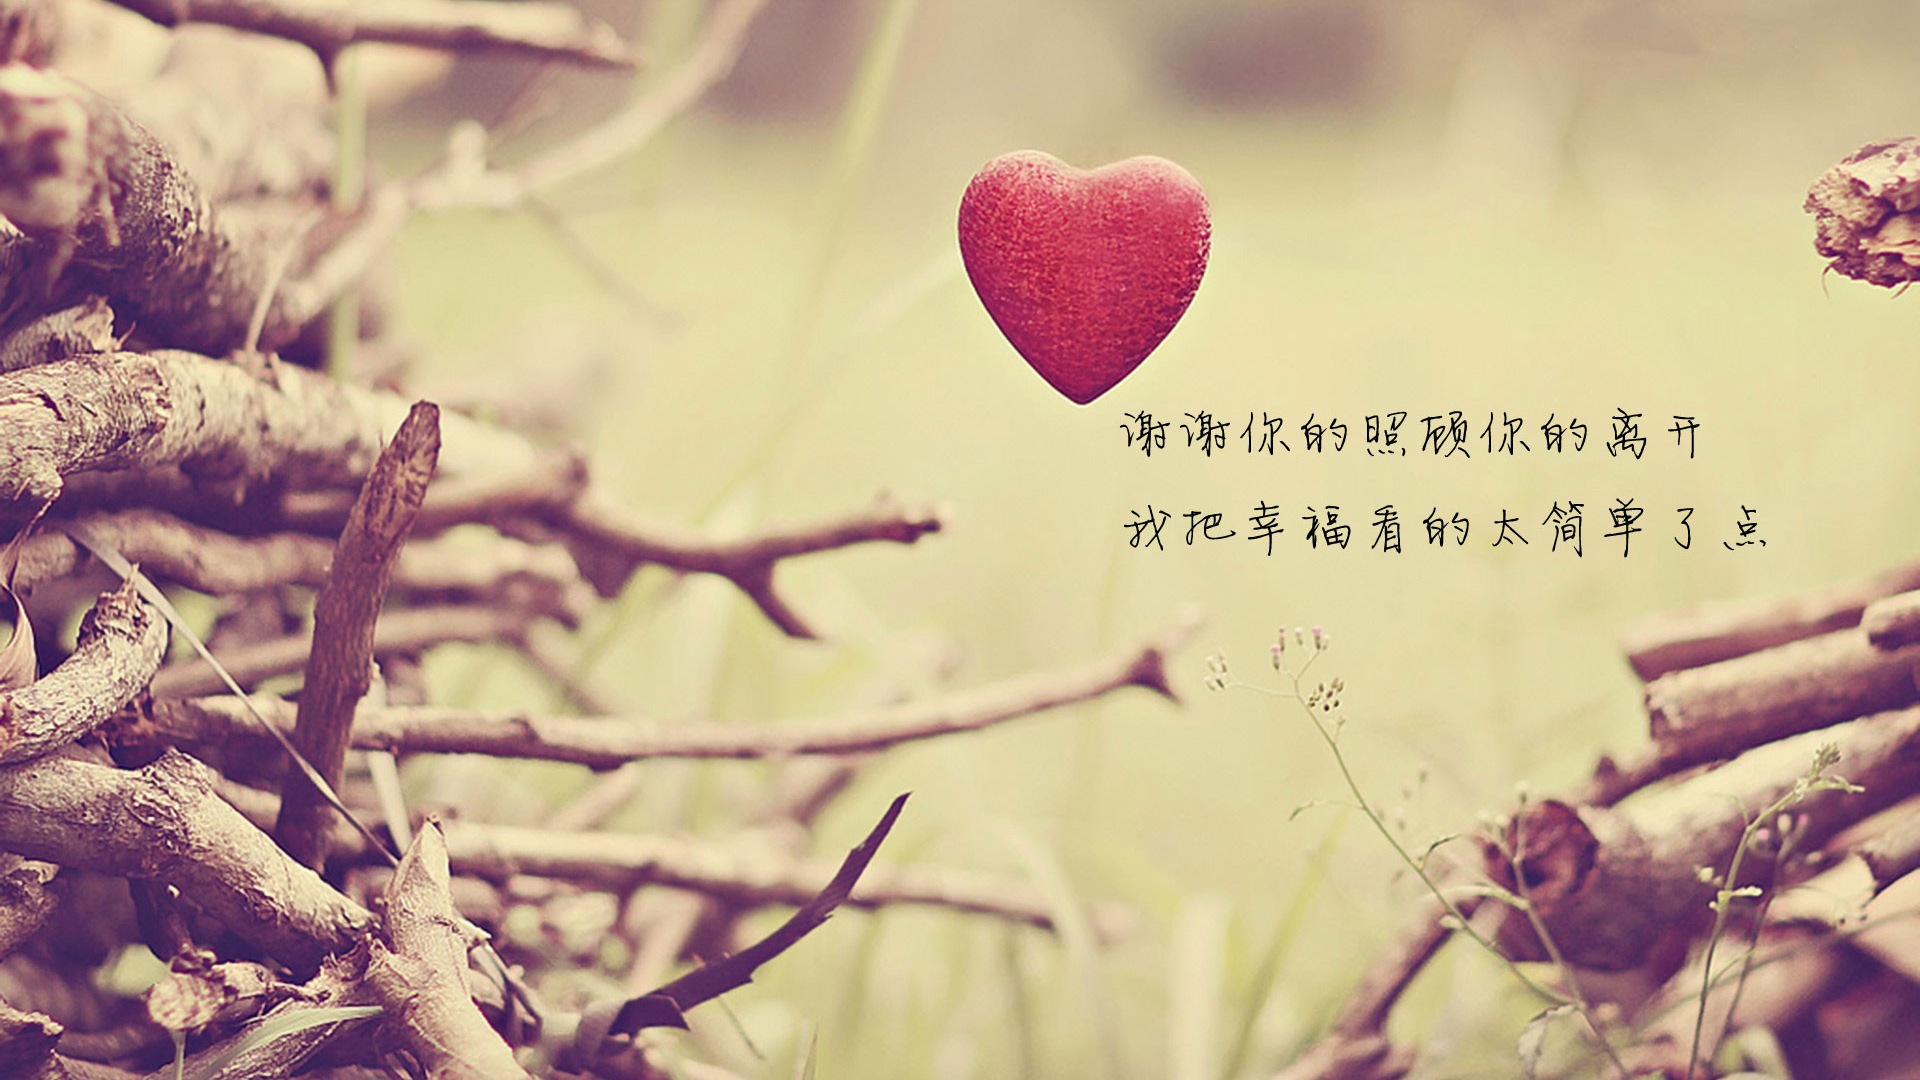 The theme of love, creative heart-shaped HD wallpapers #7 - 1920x1080